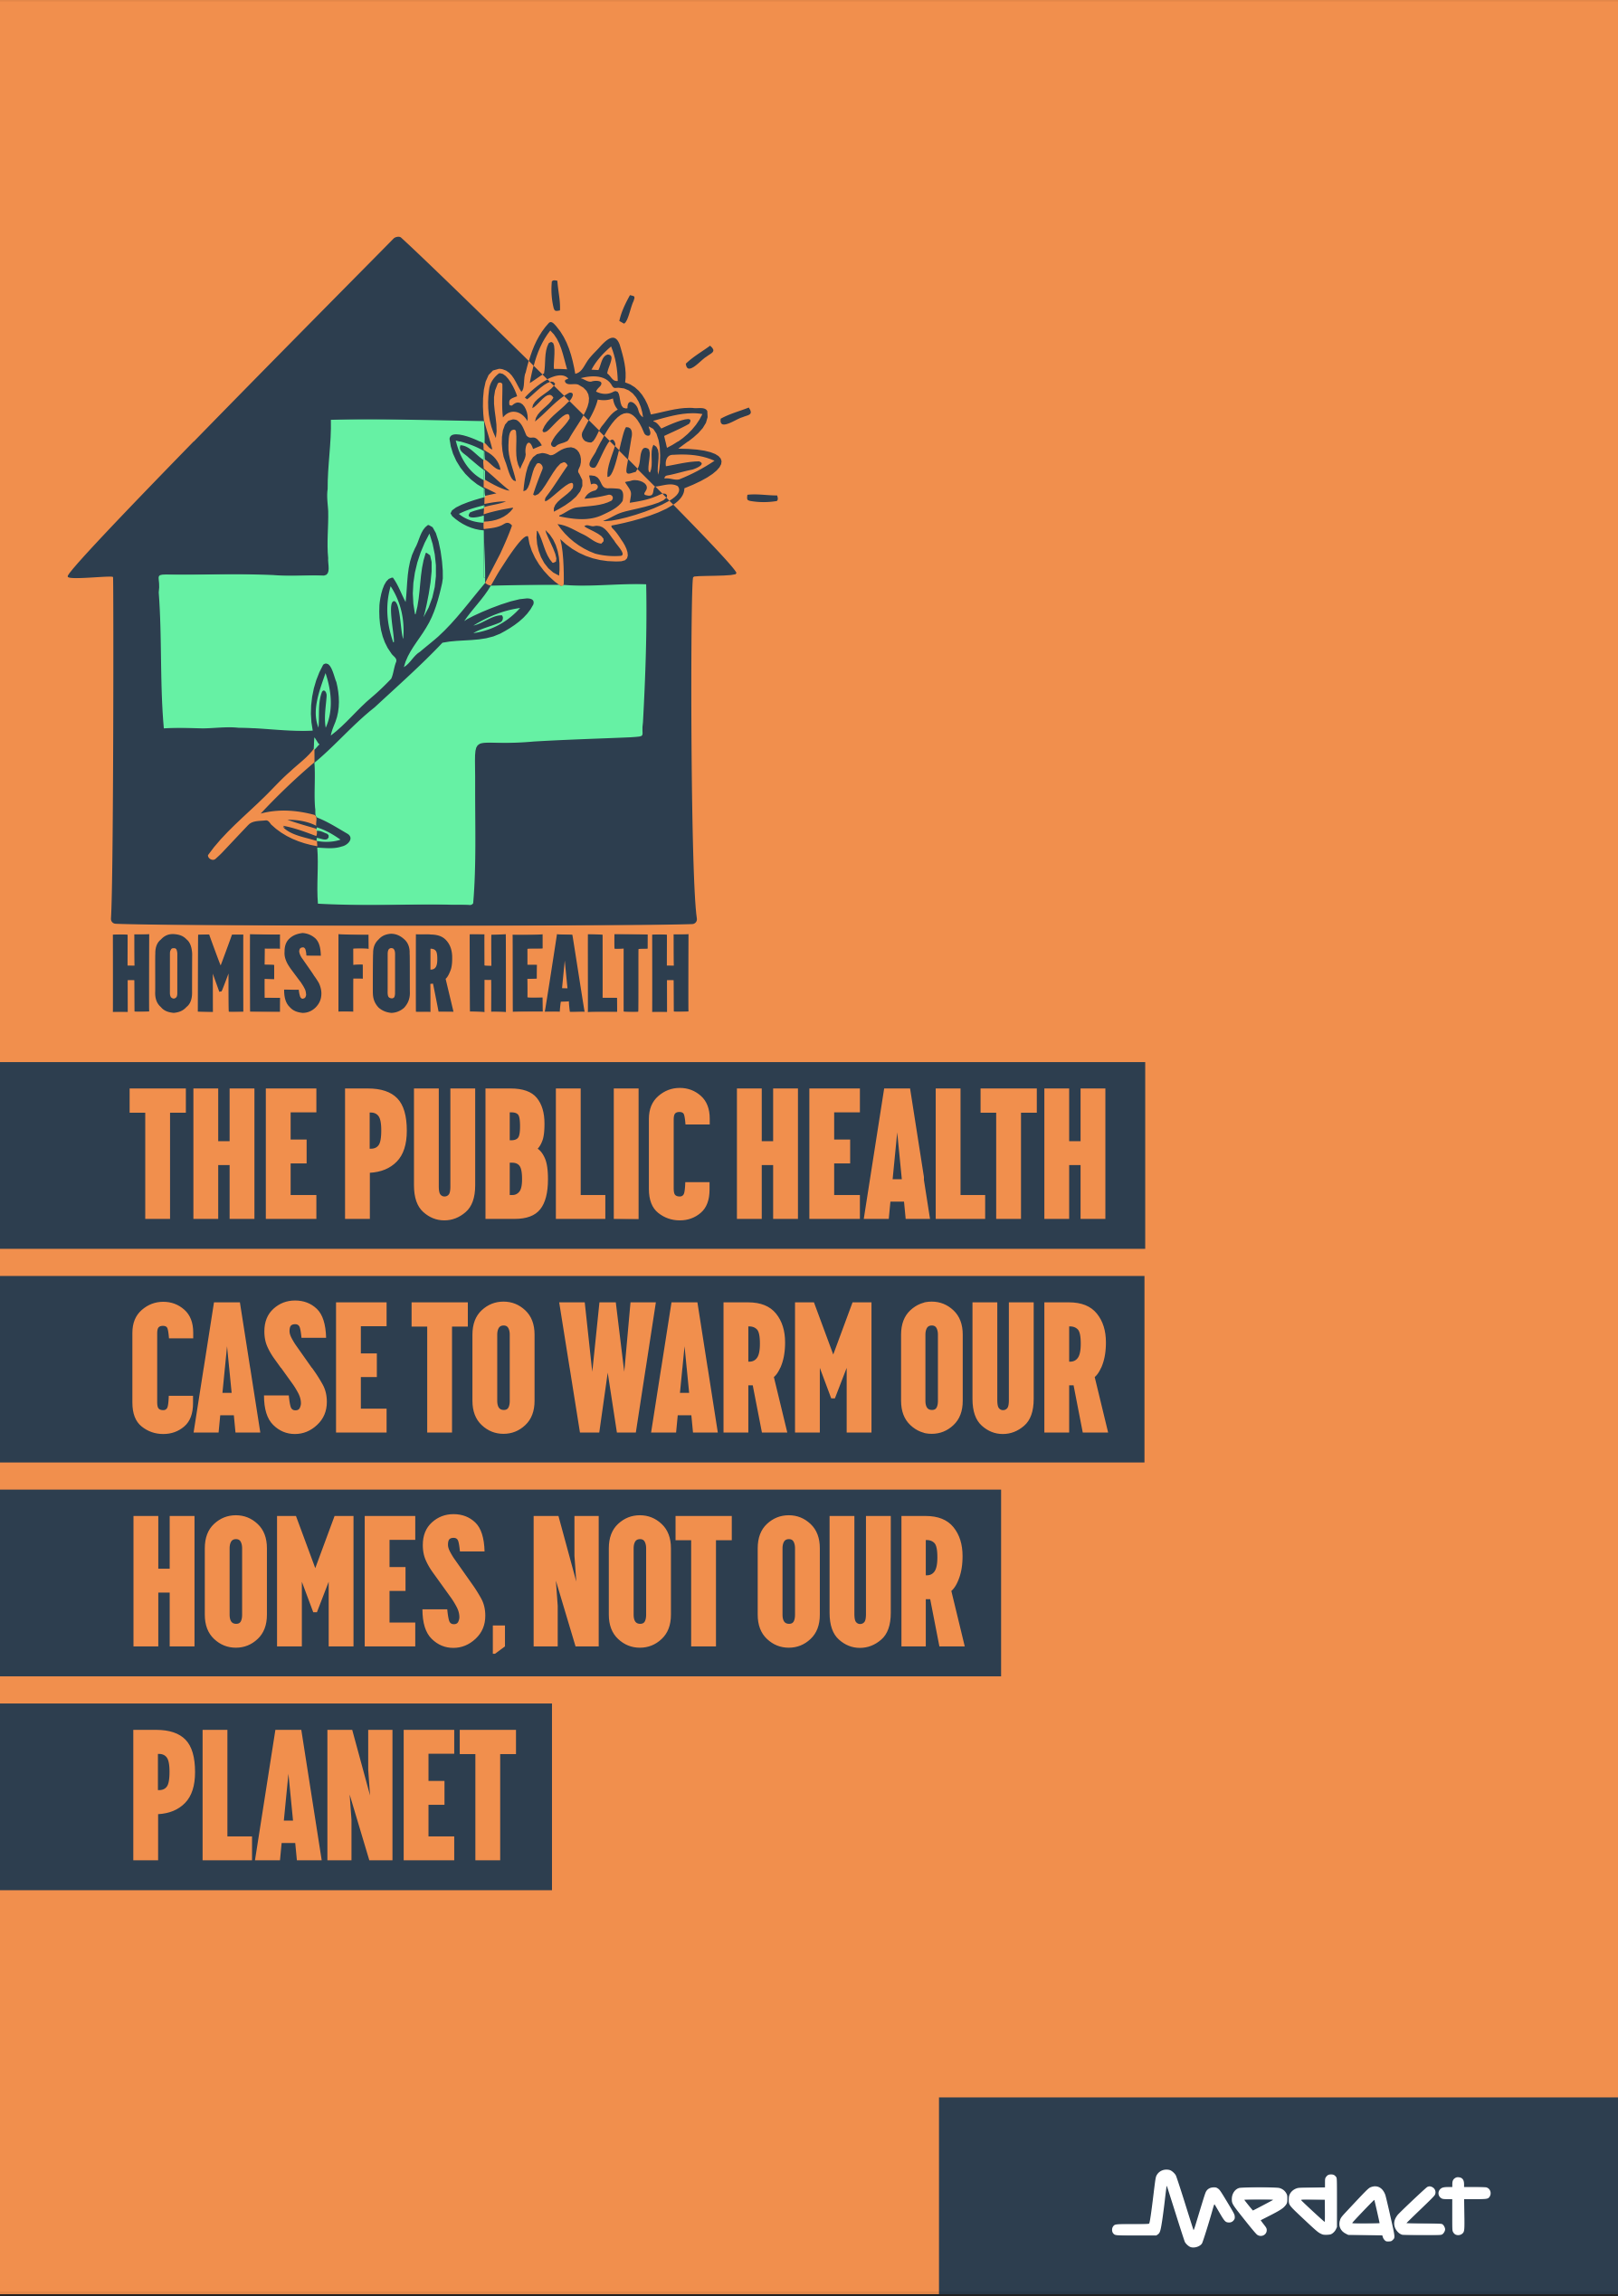 Homes for Health: The Public Health Case to Warm Our Homes, Not Our Planet